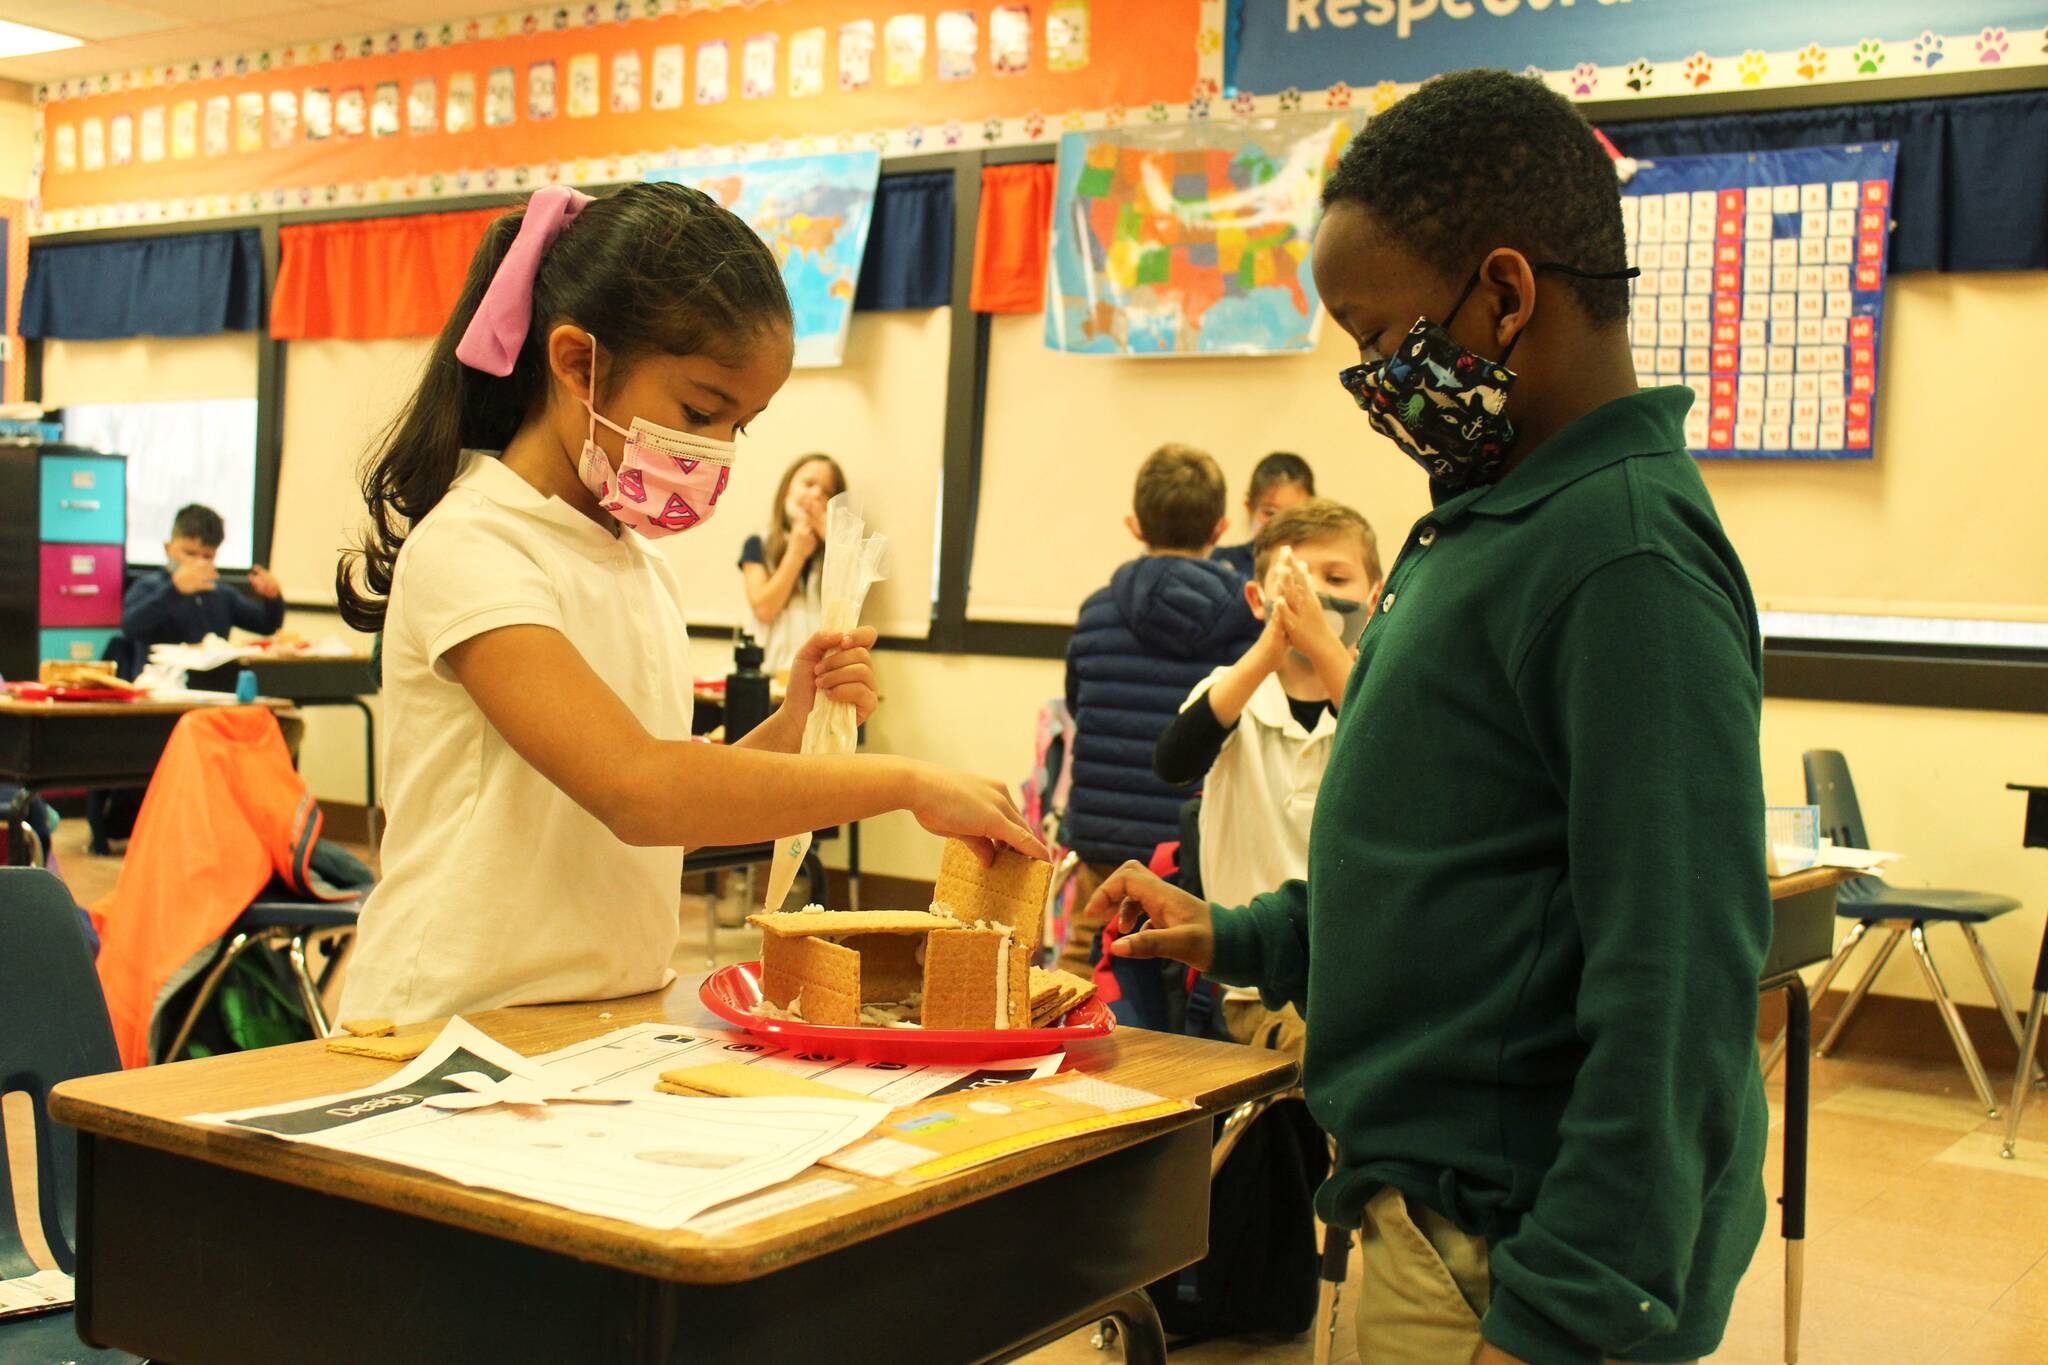 Photo by Karina Andrew/Whidbey News-Times
Second grade students Adaleigh Navarro and Demarius Robinson try to make the graham cracker walls stick to their frosting cement in class Dec. 16.